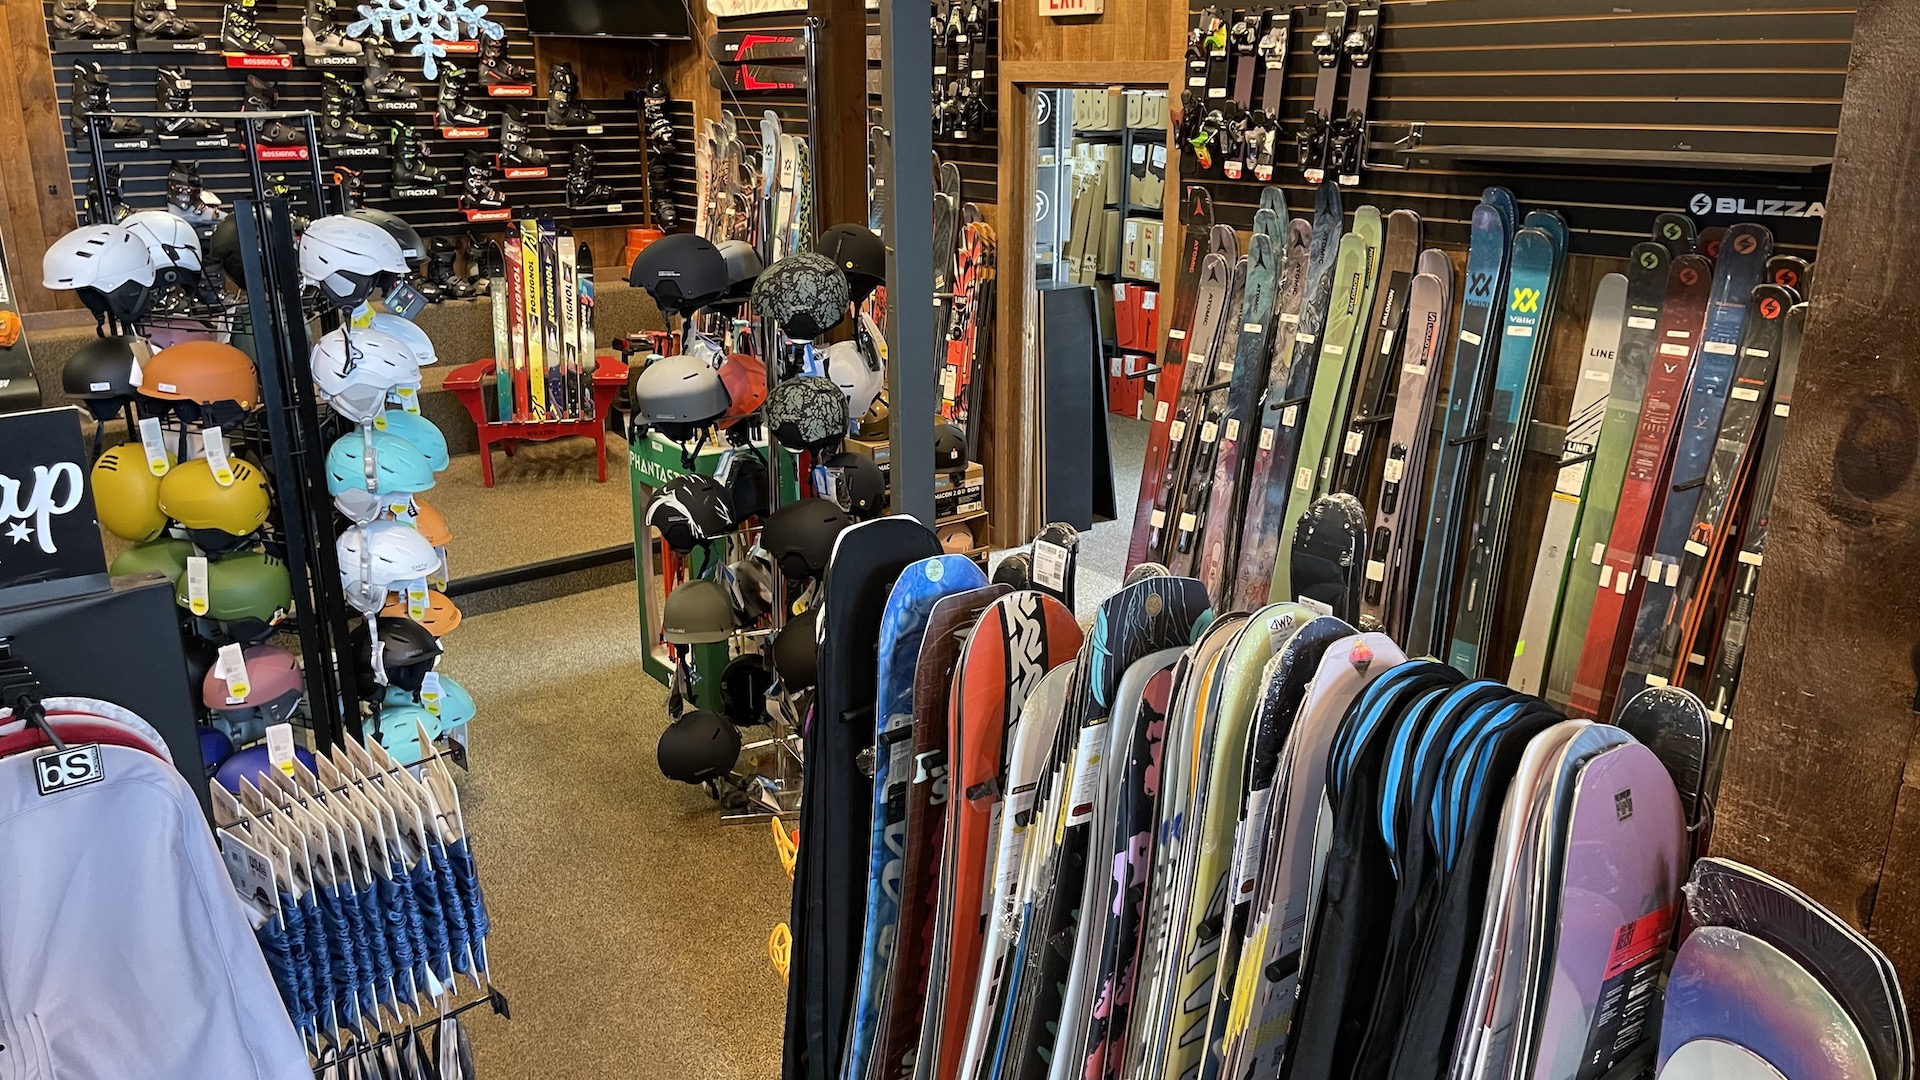 Skis and Snowboards at Snow Trails Ski Shop Mansfield, Ohio